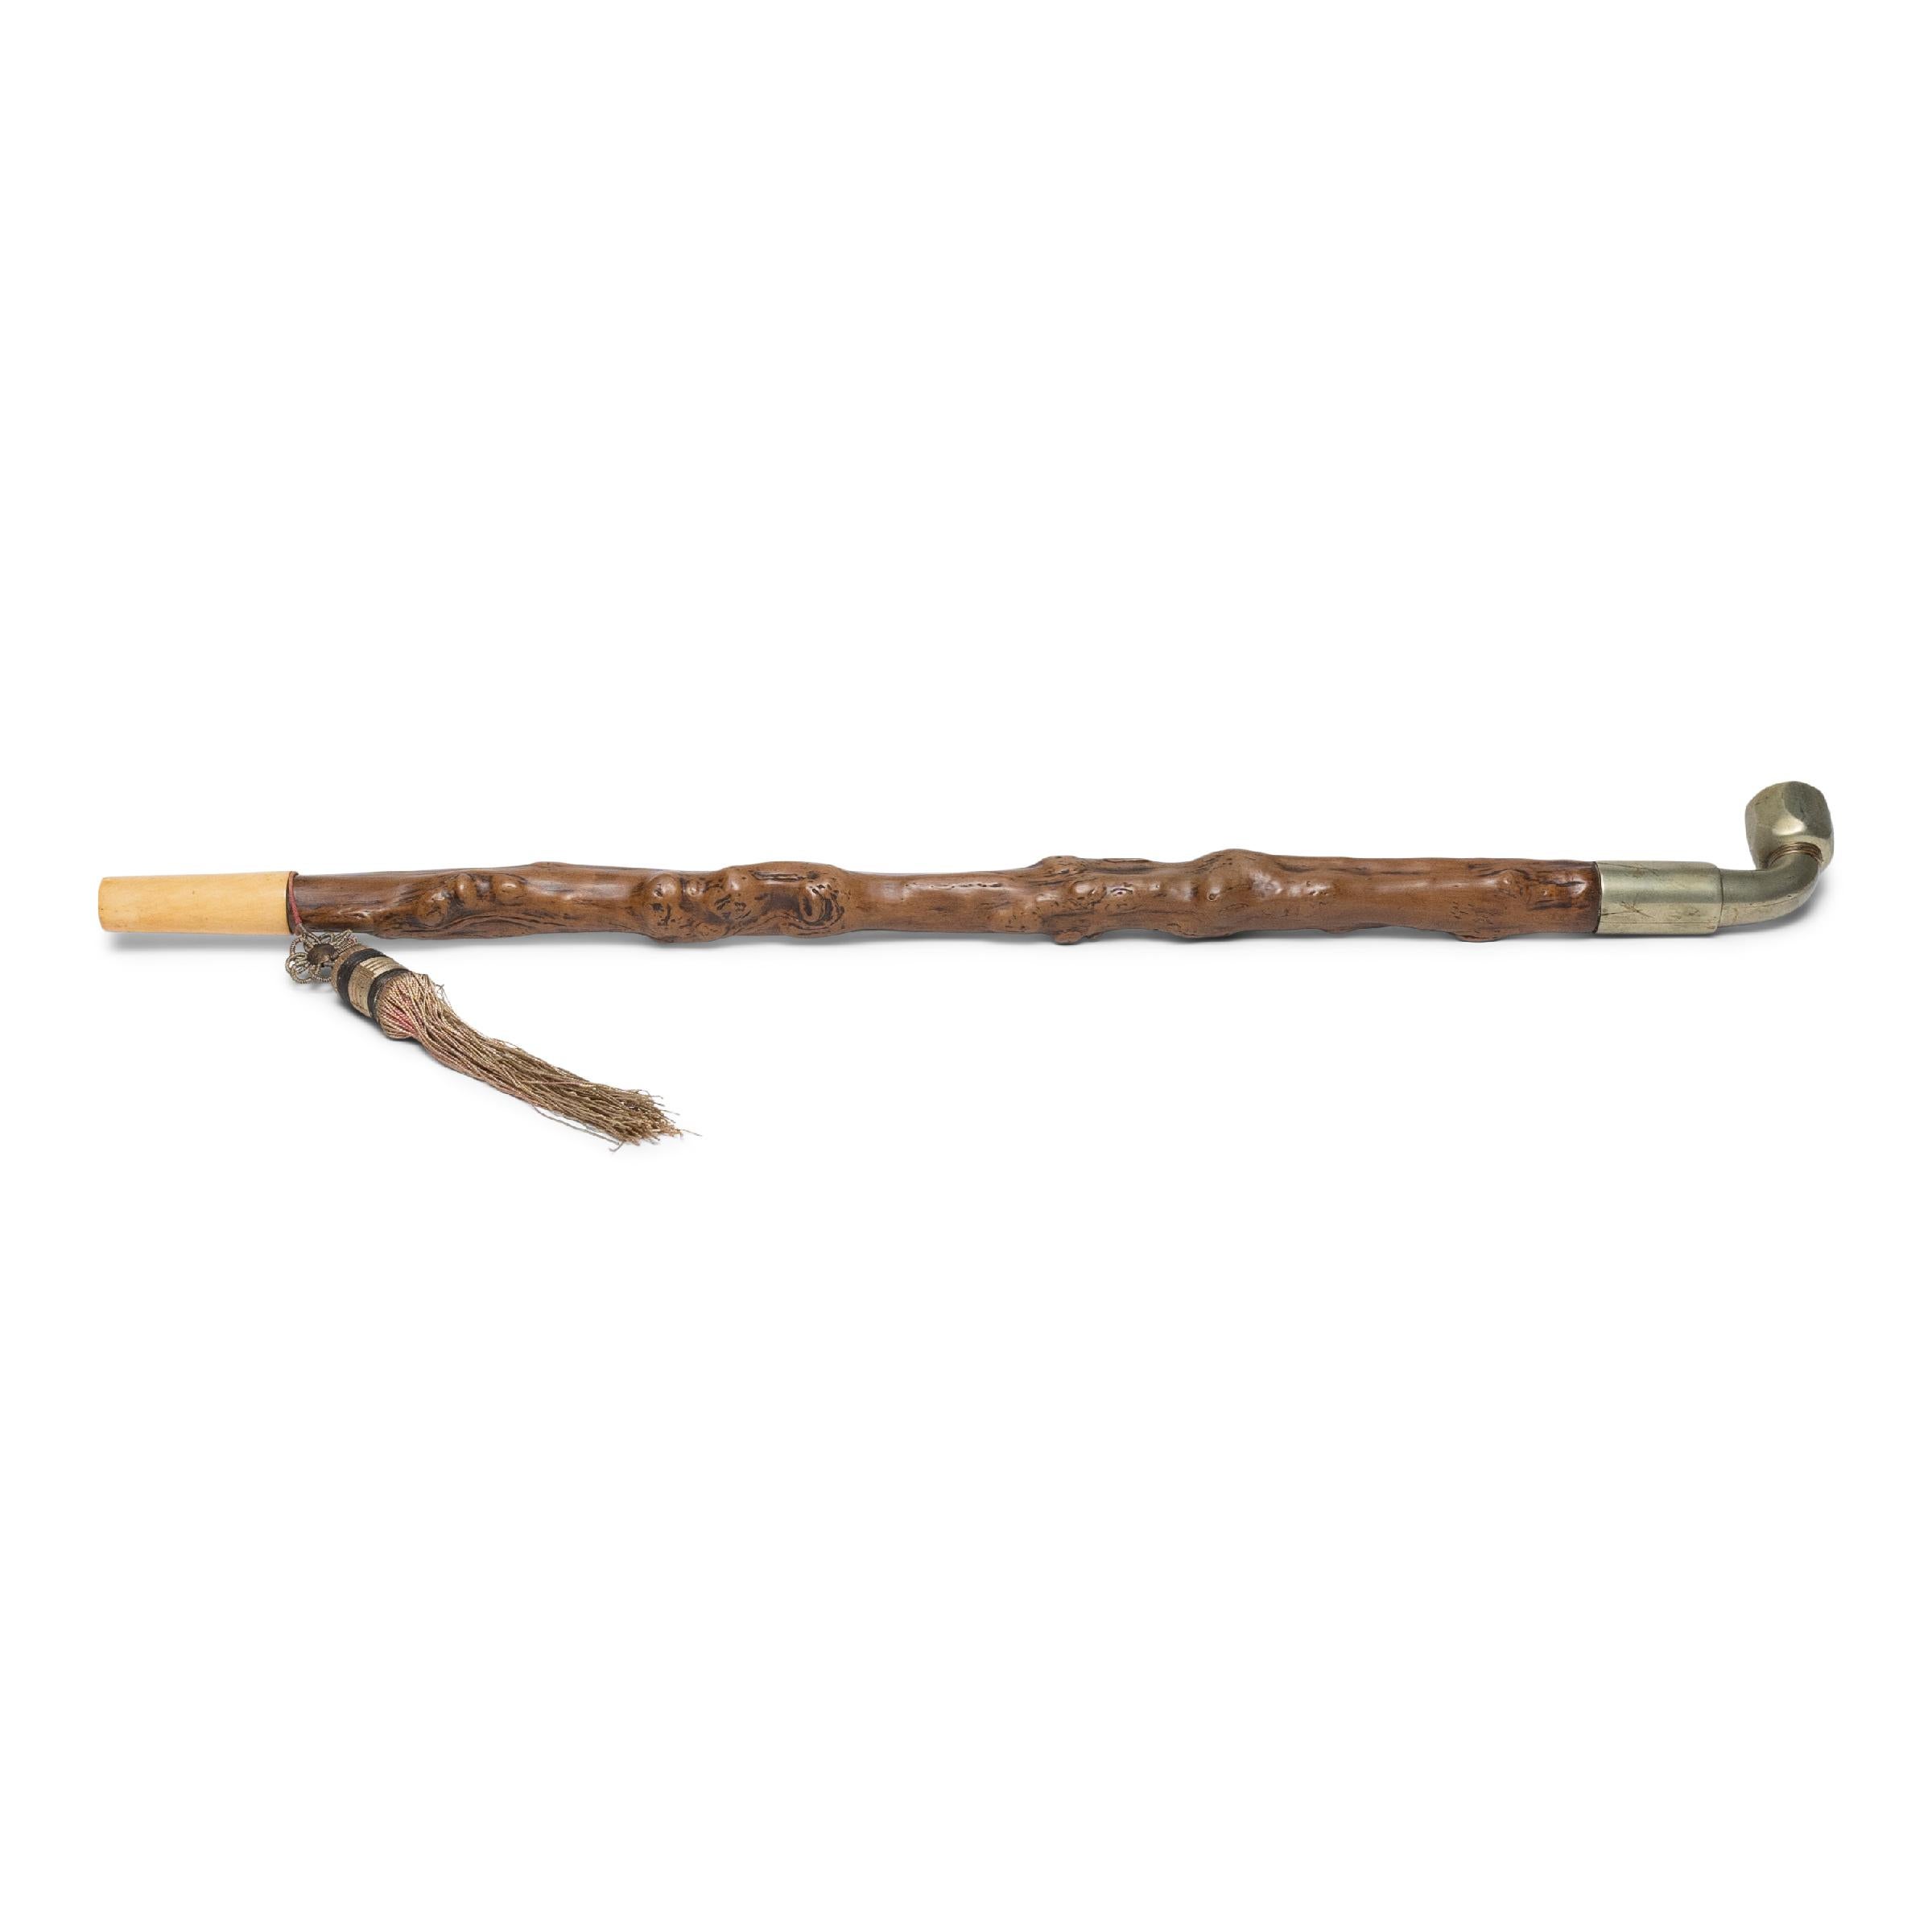 This monumental Chinese pipe is beautifully sculpted with a long boxwood handle shaped to resemble a branch gnarled with knots and burls. Although its grand size recalls large bamboo opium pipes, the 19th-century pipe would have been used  for